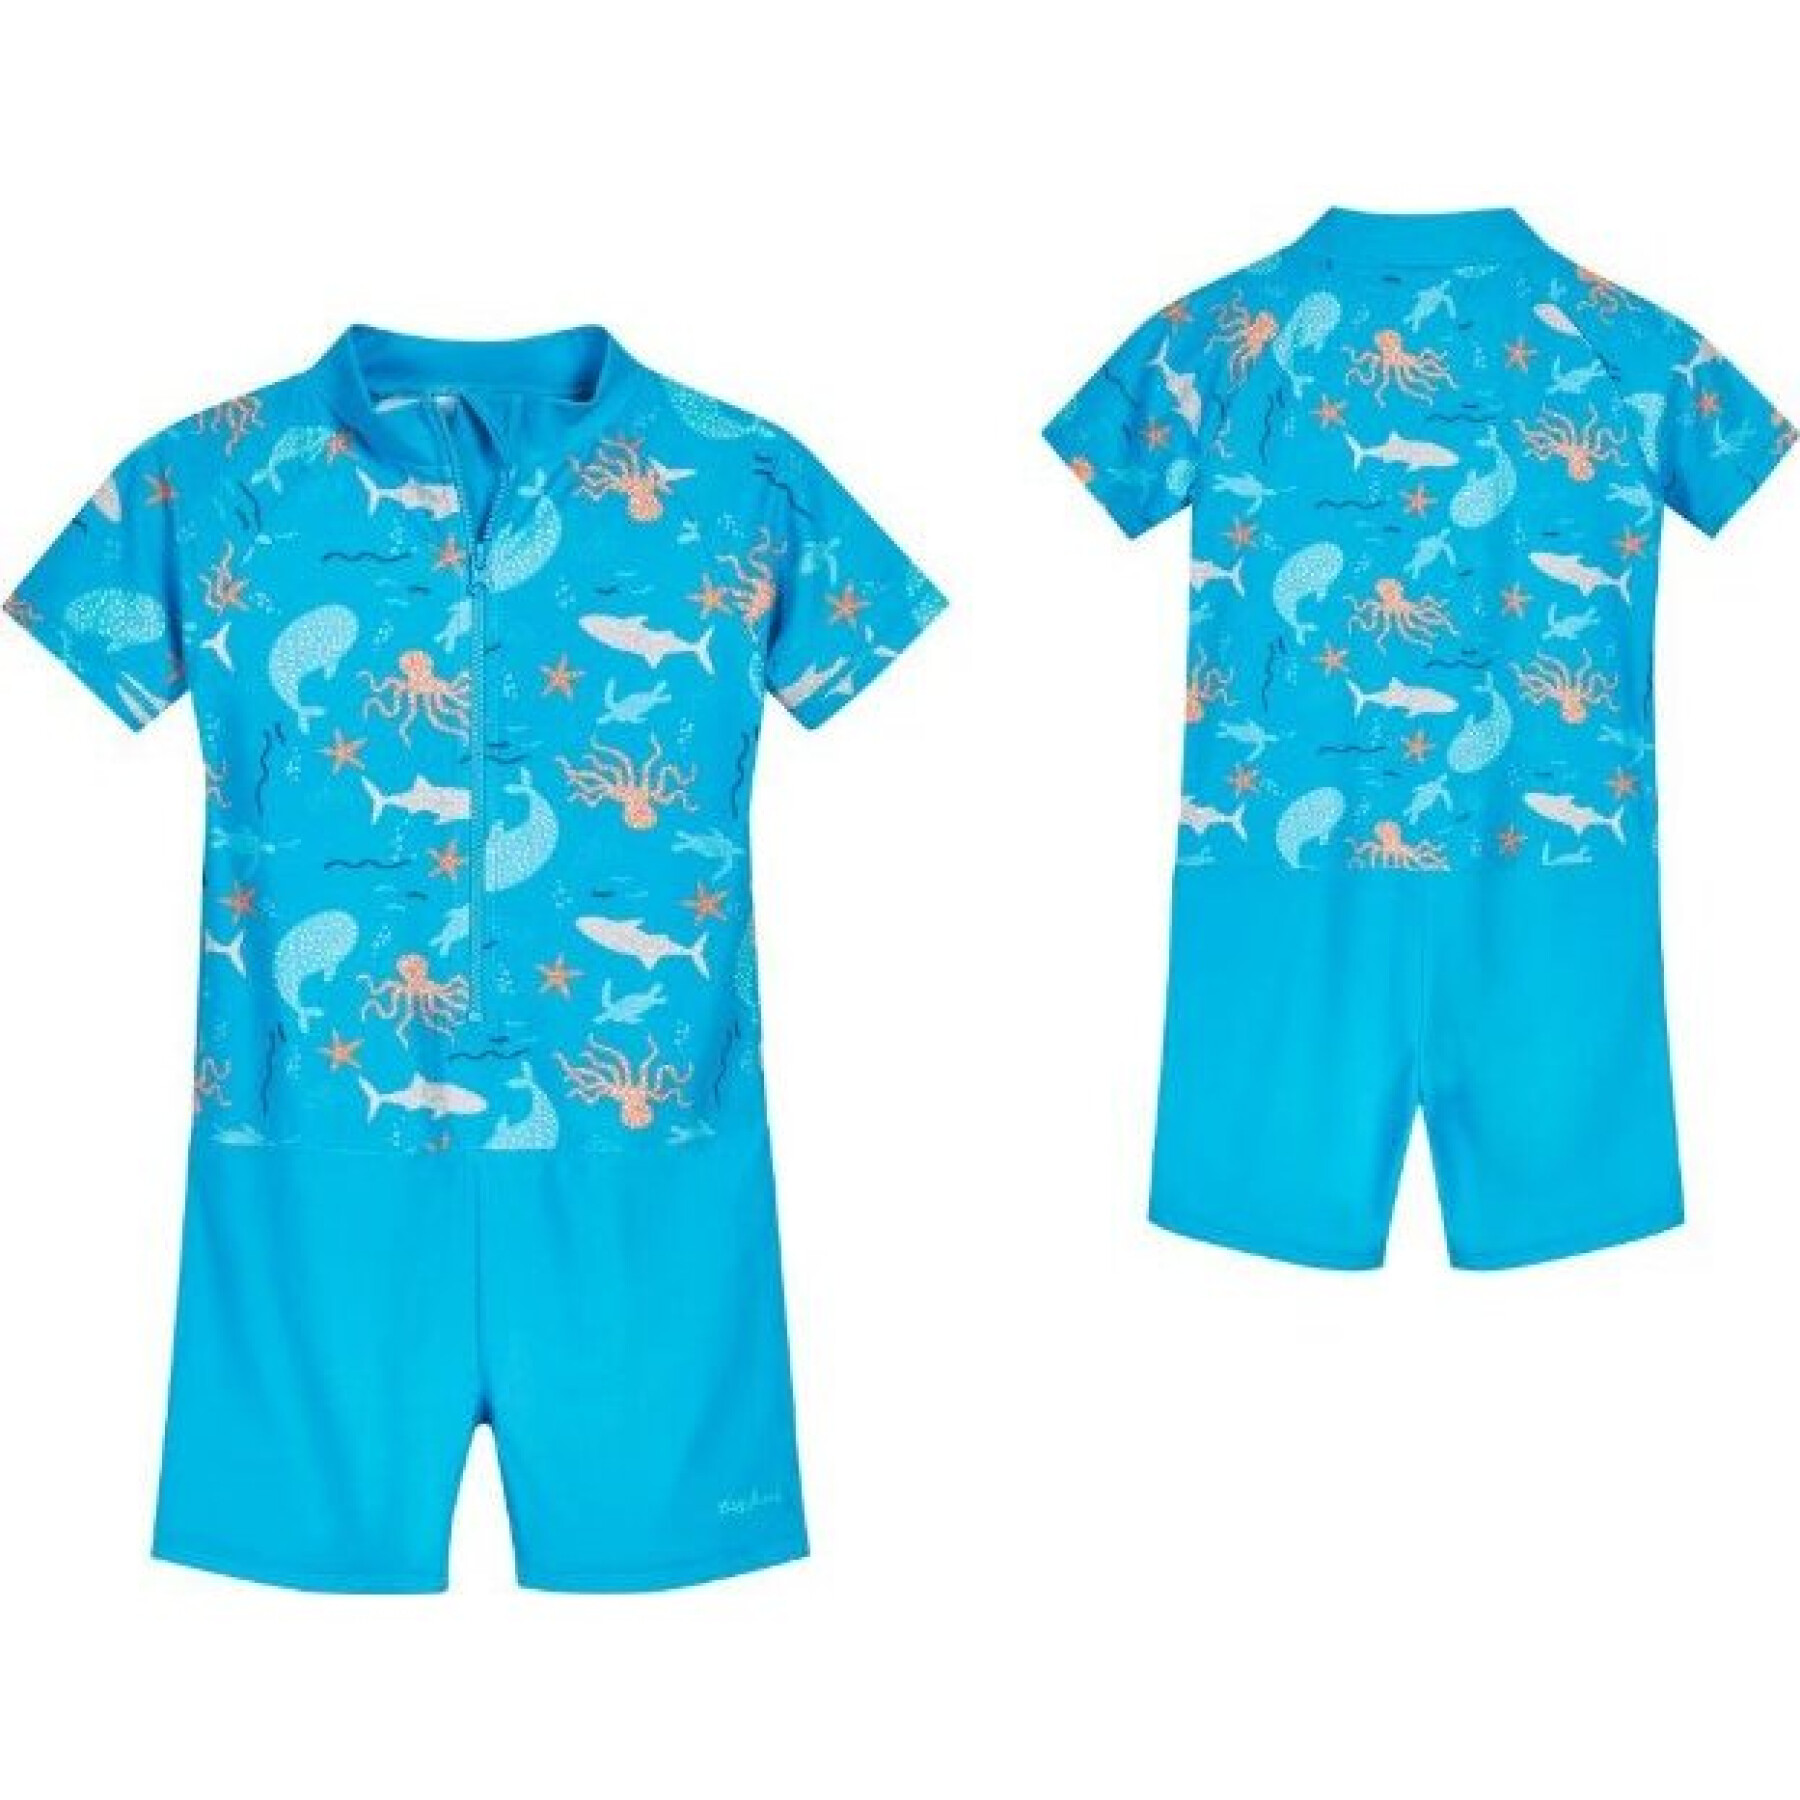 Combi-short uv protection short sleeves baby Playshoes Sea Animals